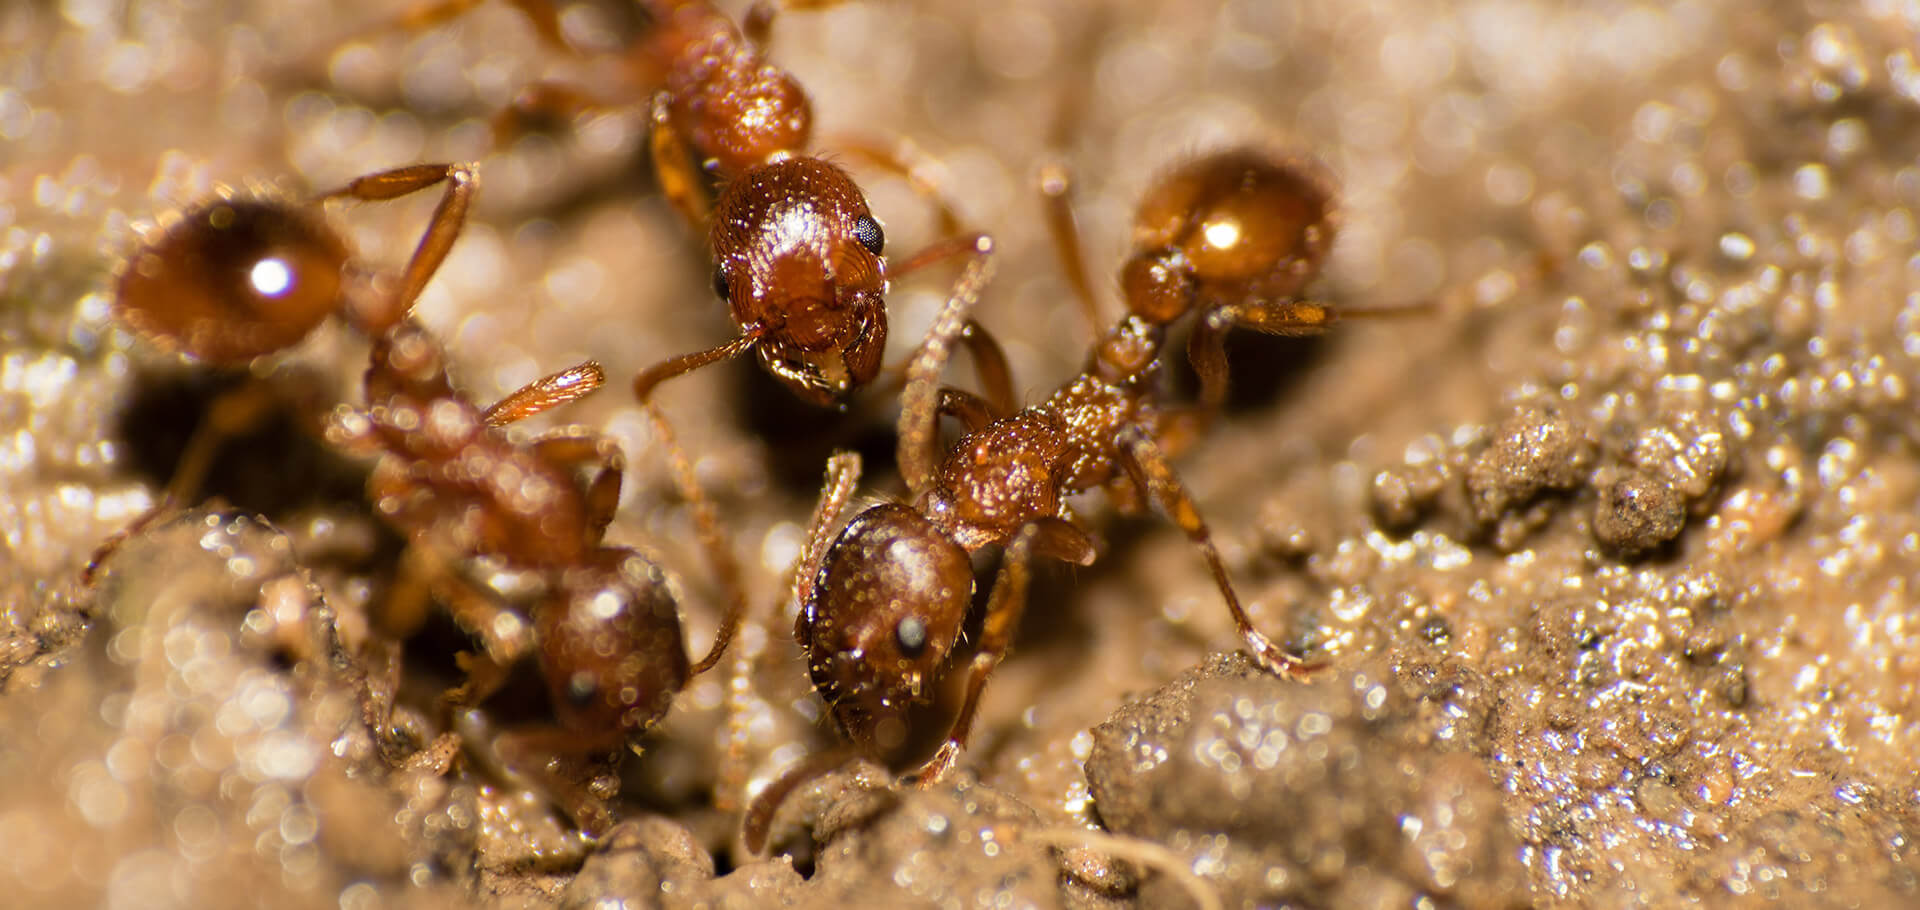 How to identify and get rid of fire ants